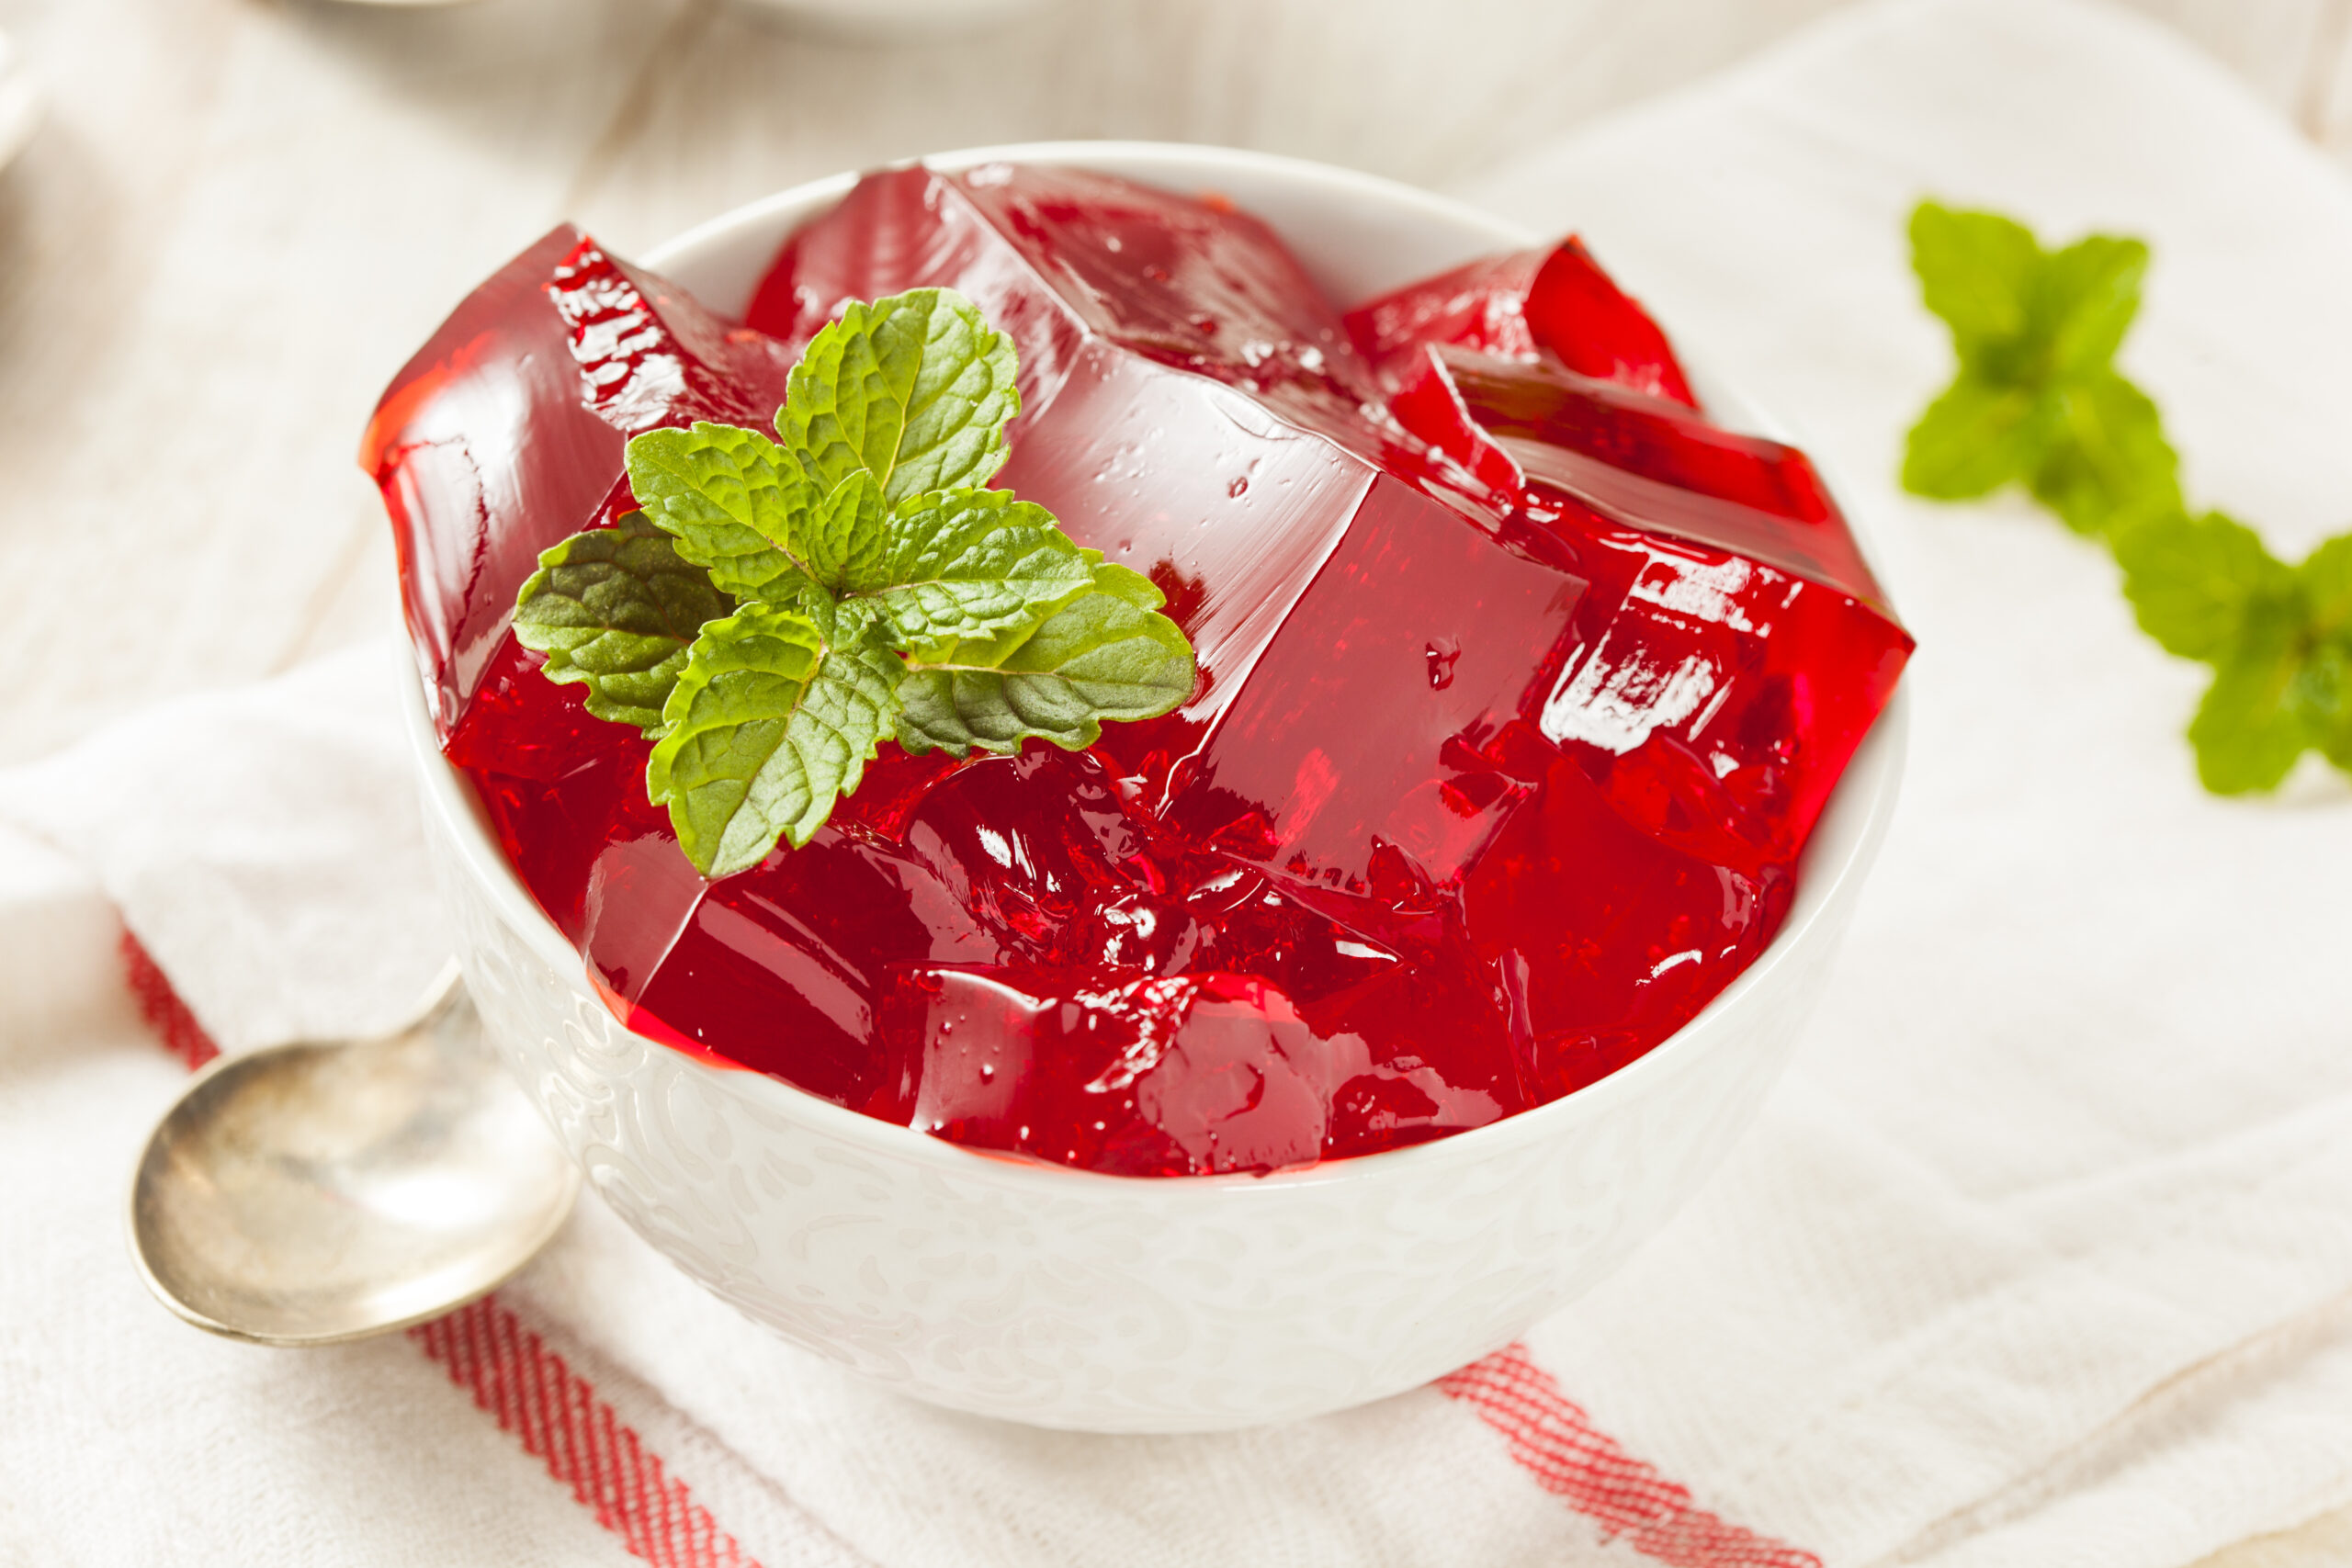 Fortijuice Recipe: Homemade Red Cherry Gelatin Dessert in a Bowl by Nutricia